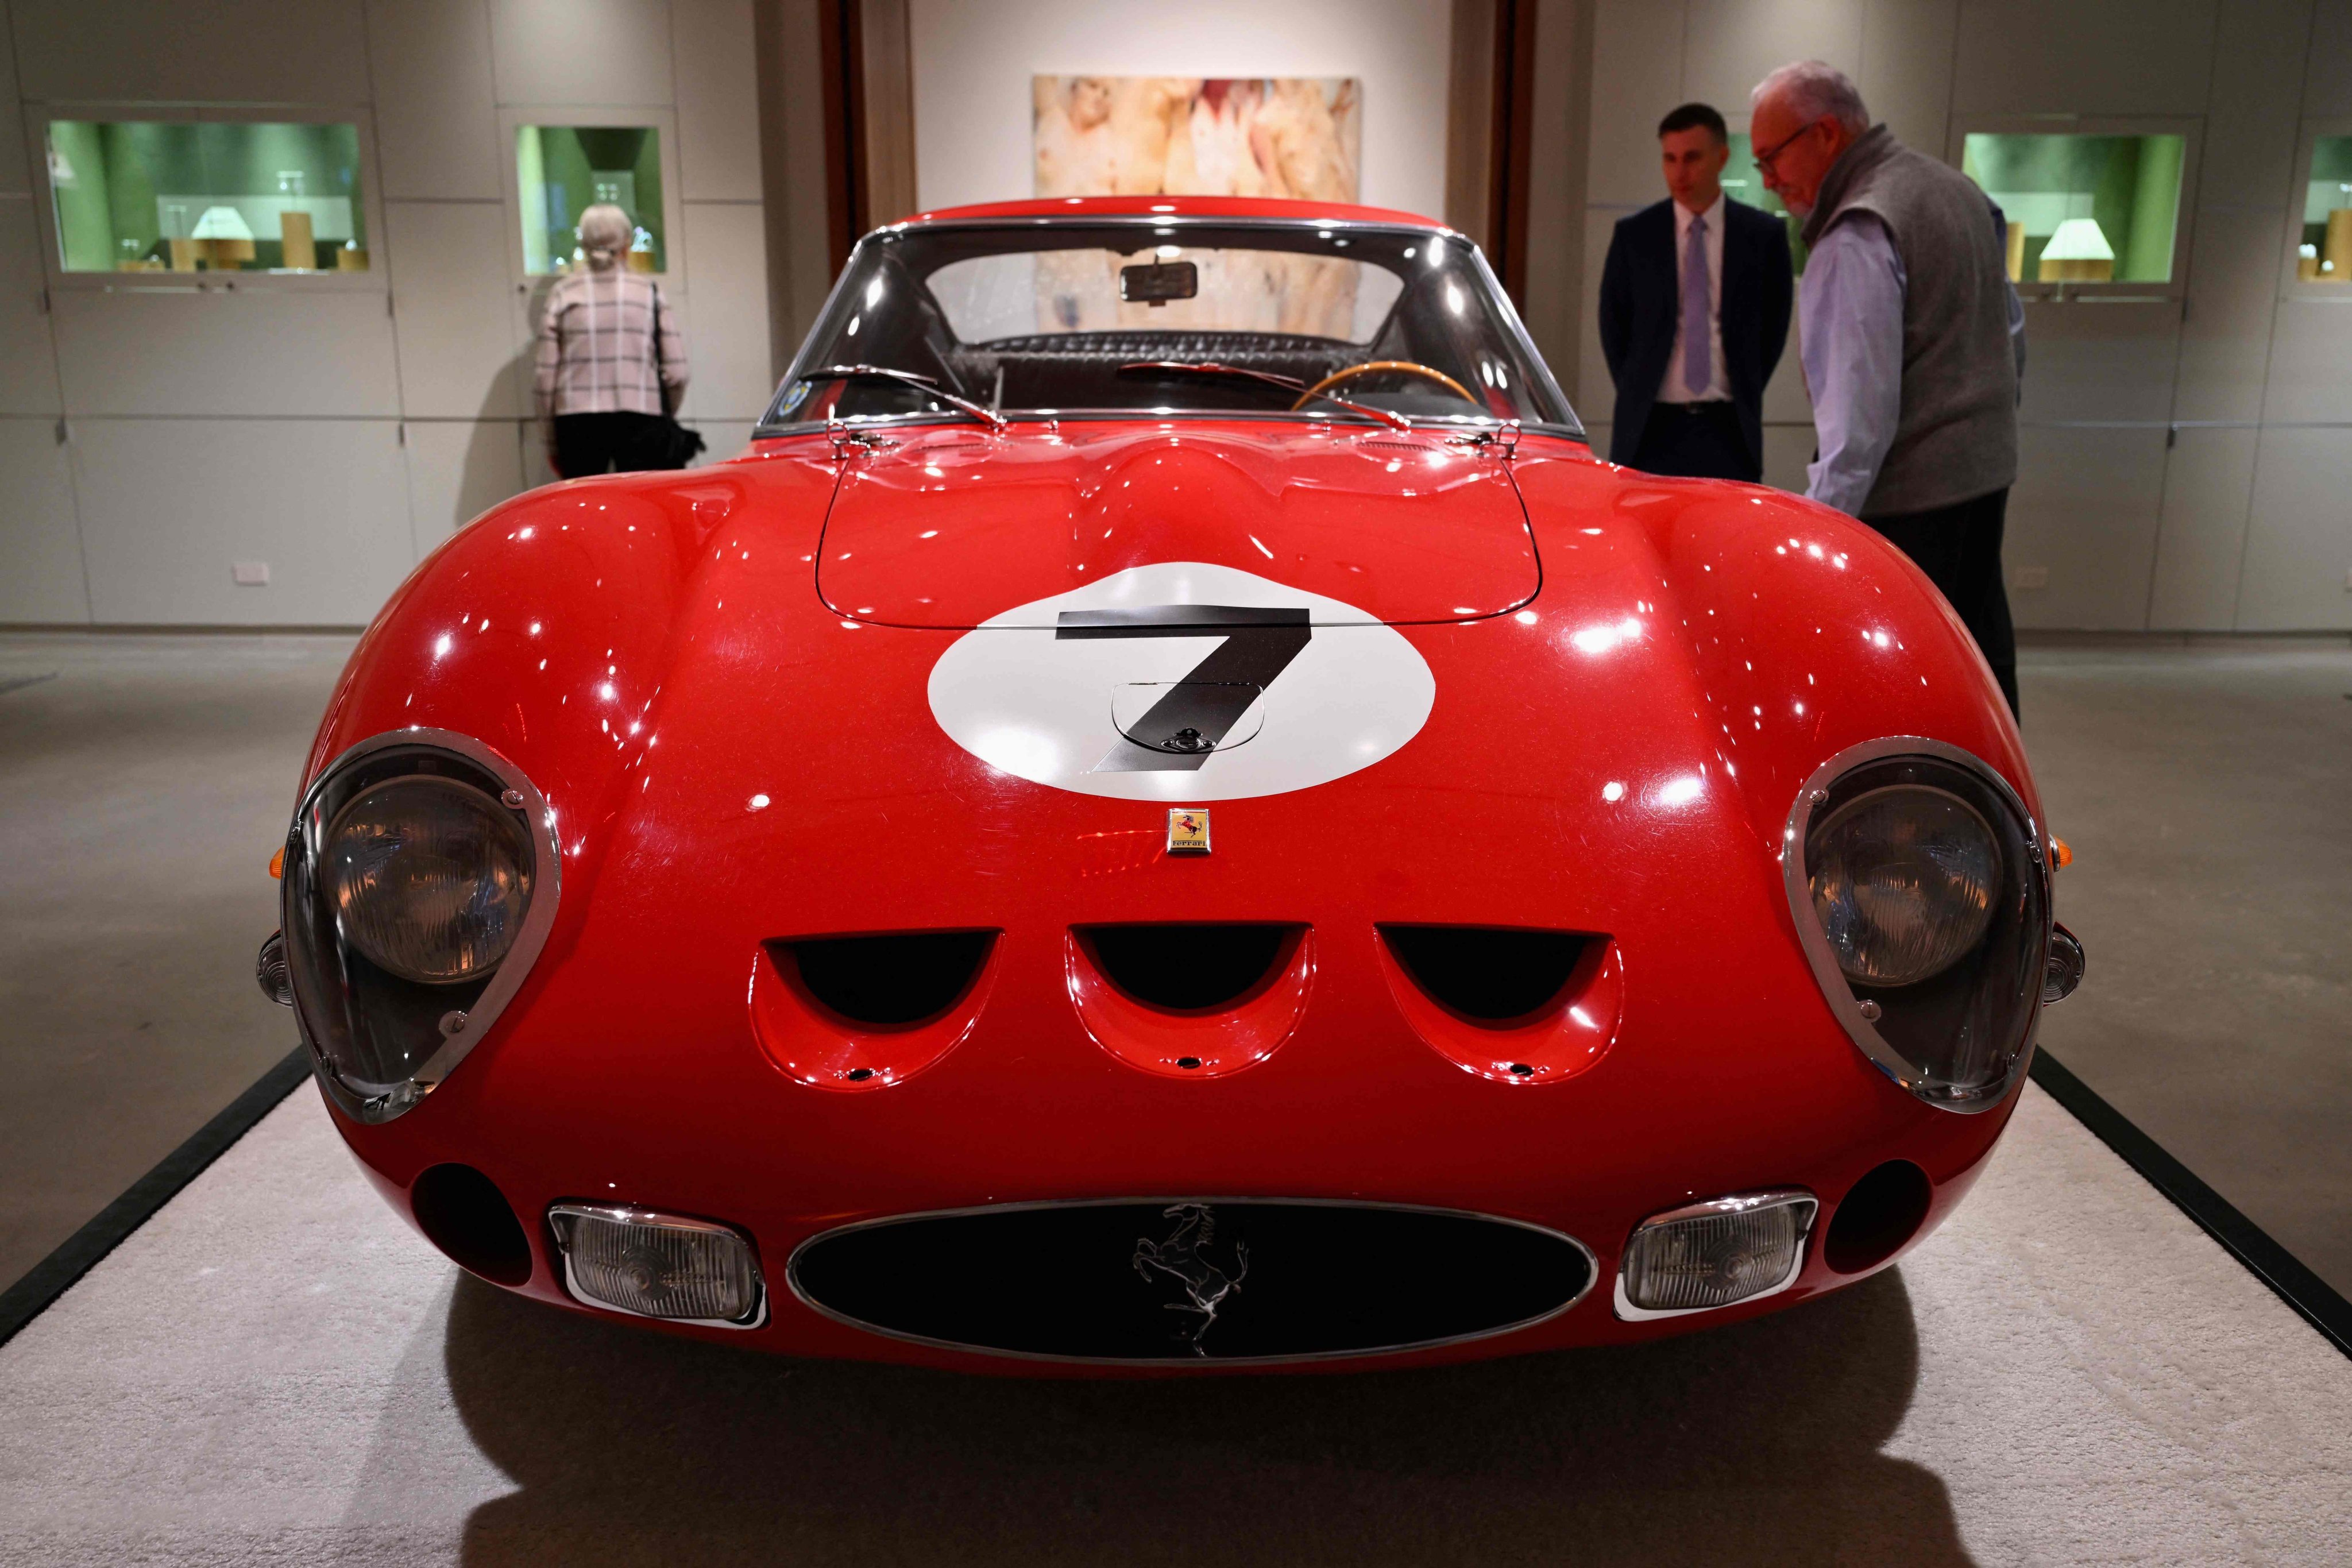 A 1962 Ferrari 250 GTO displayed at a preview event at Sotheby’s in New York. Photo: AFP